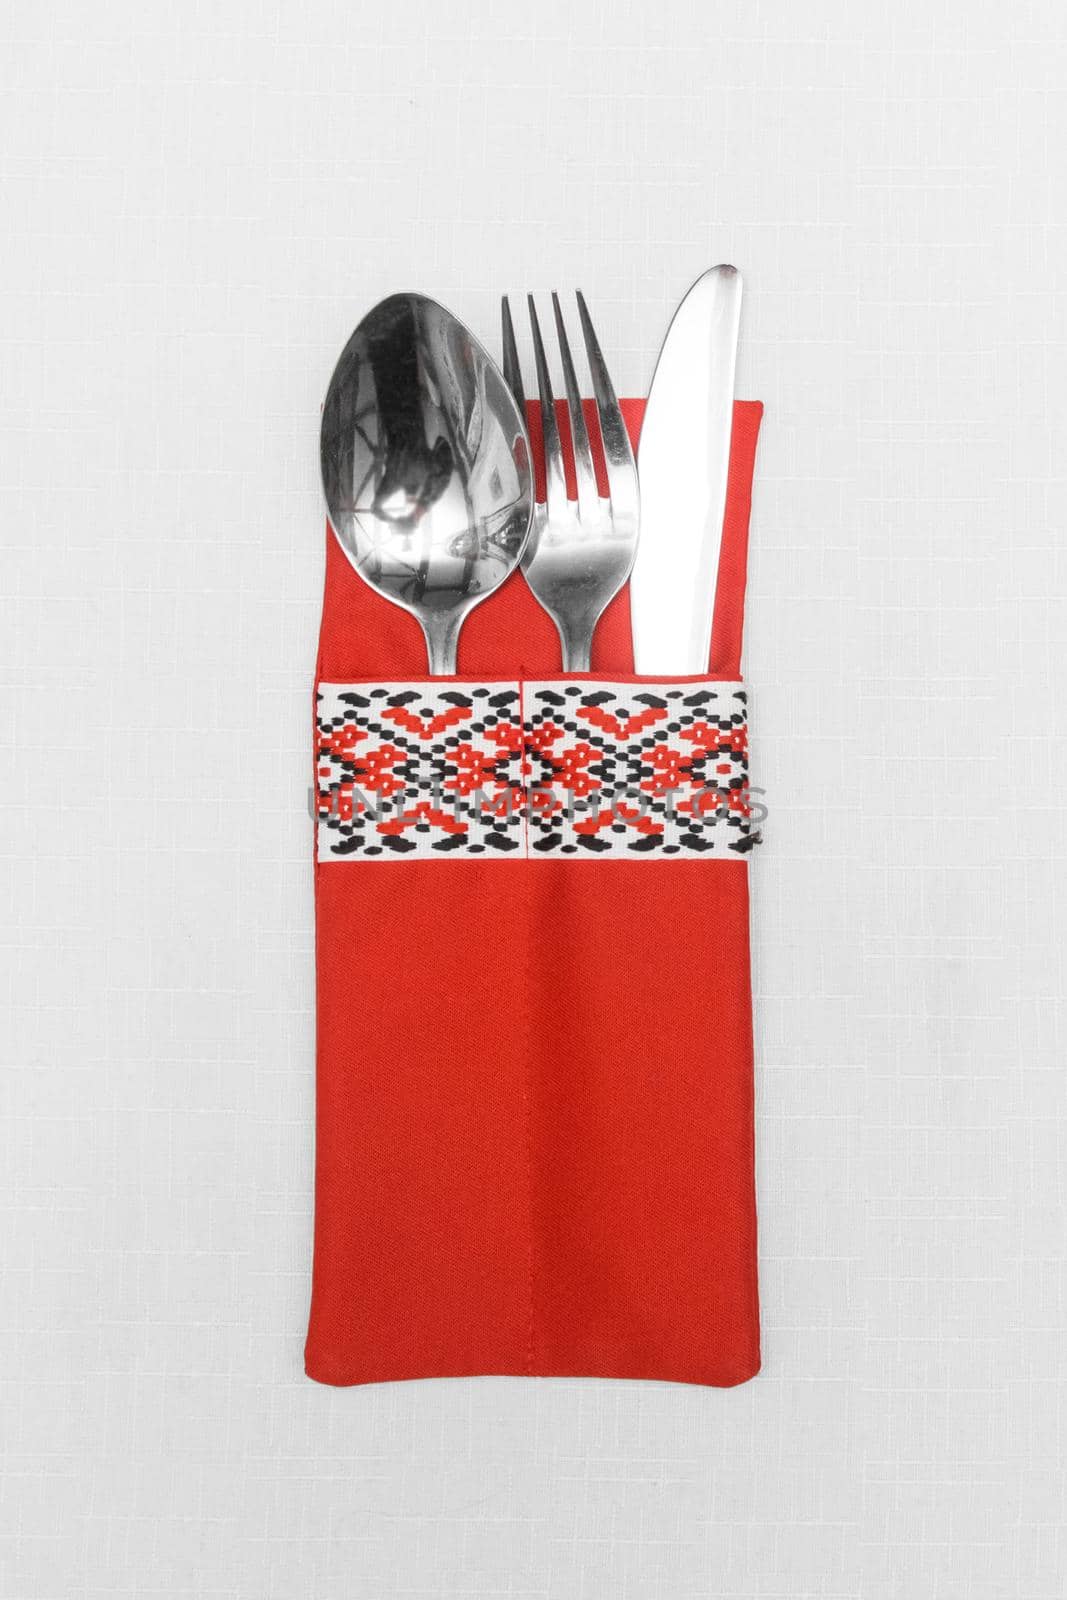 Spoon fork and knife cutlery utensil silverware in traditional ornament style on white tablecloth background.